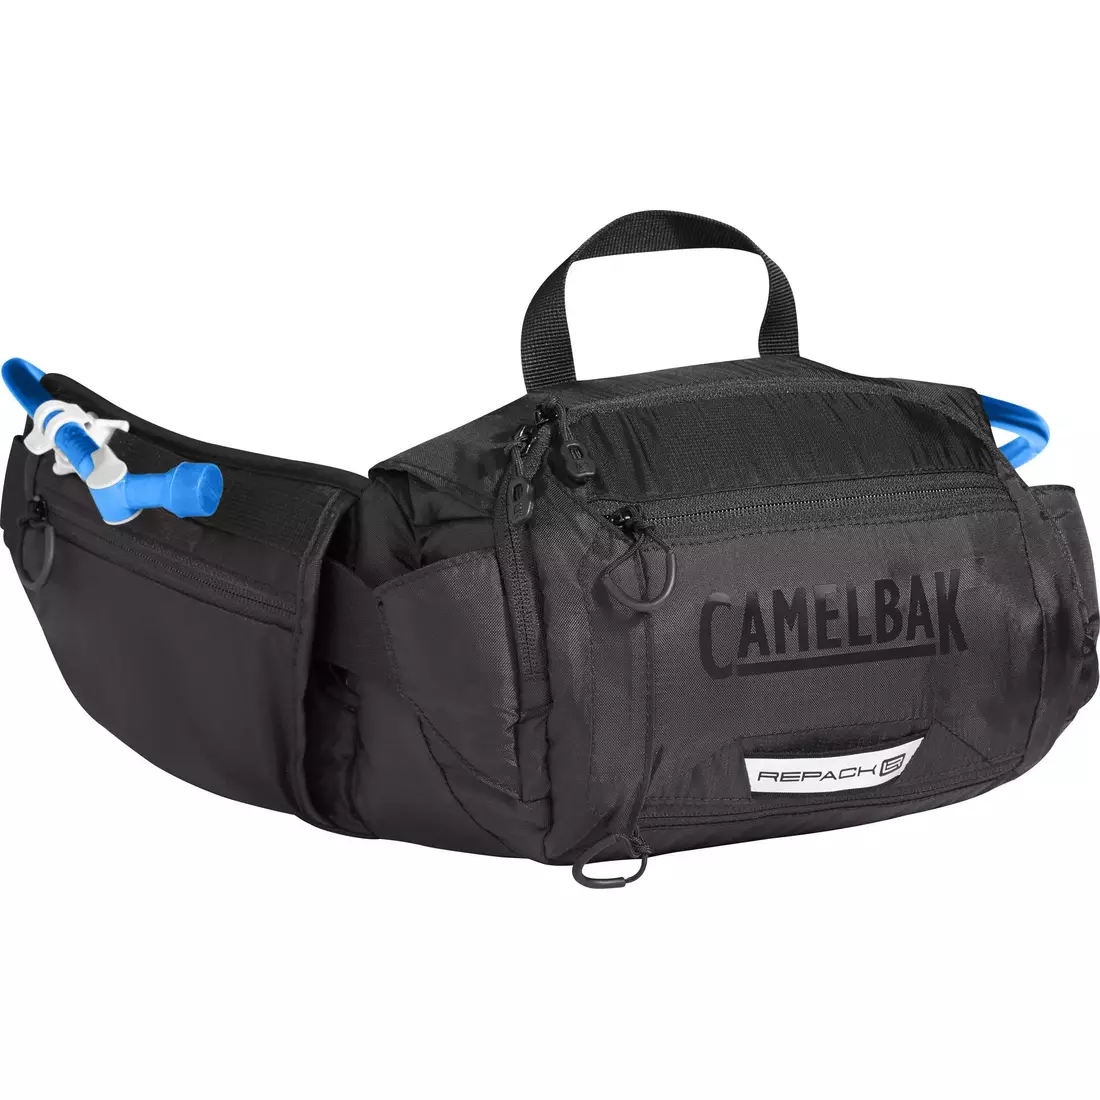 CAMELBAK SS18 kidney with a water bag Repack LR 4 50 oz / 1,5 L Black 001000